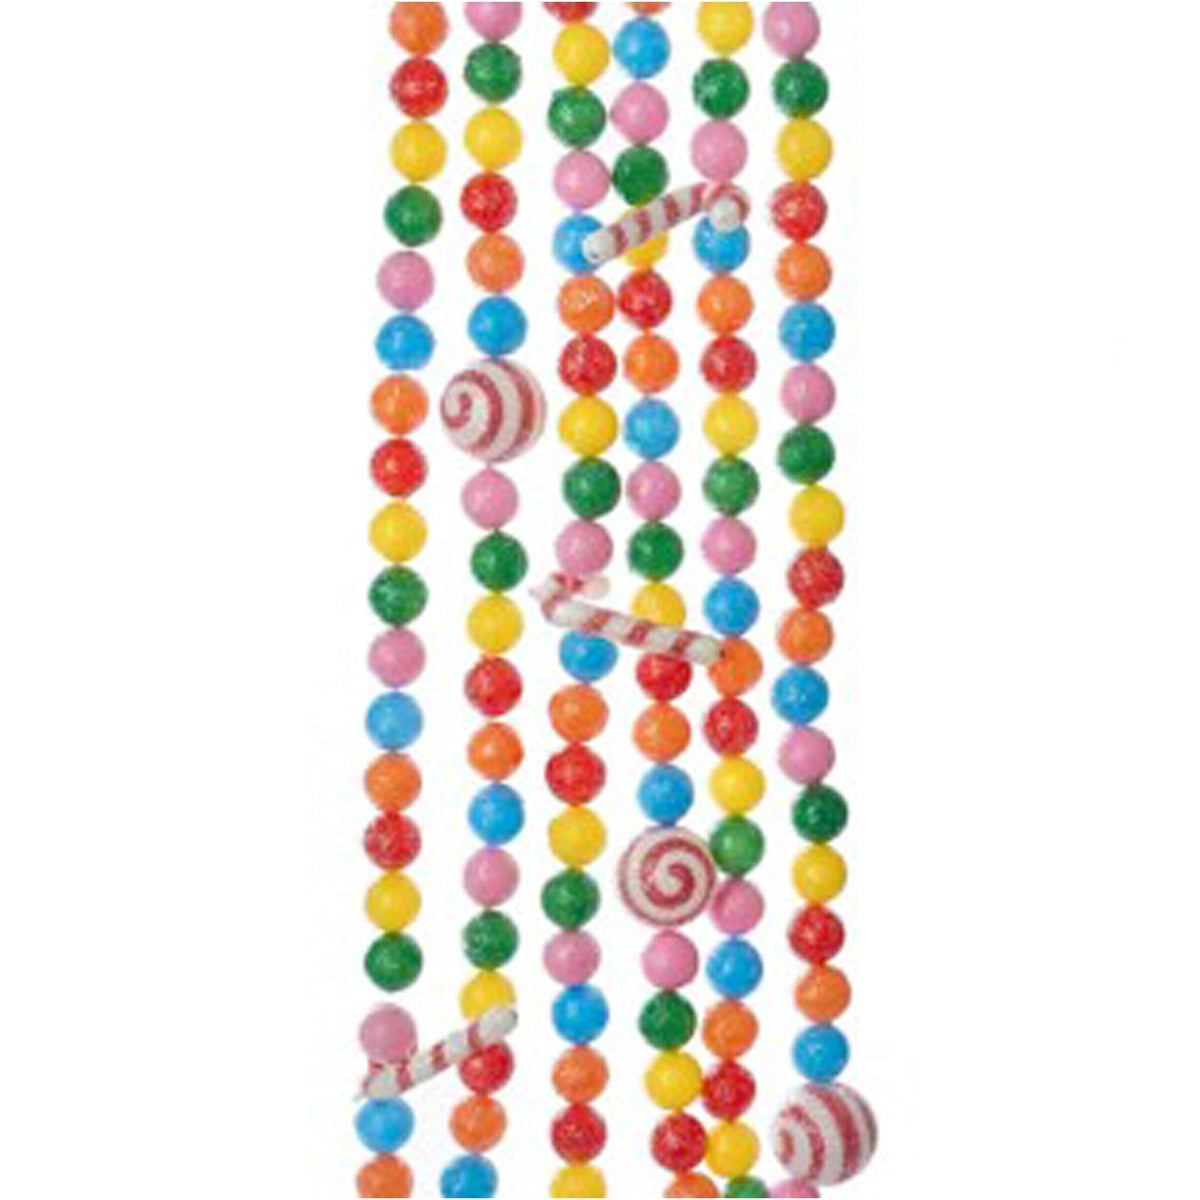 KURT S. ADLER INC Christmas Candy Cane and Candy Ball Garland, 72 Inches, 1 Count 086131570605